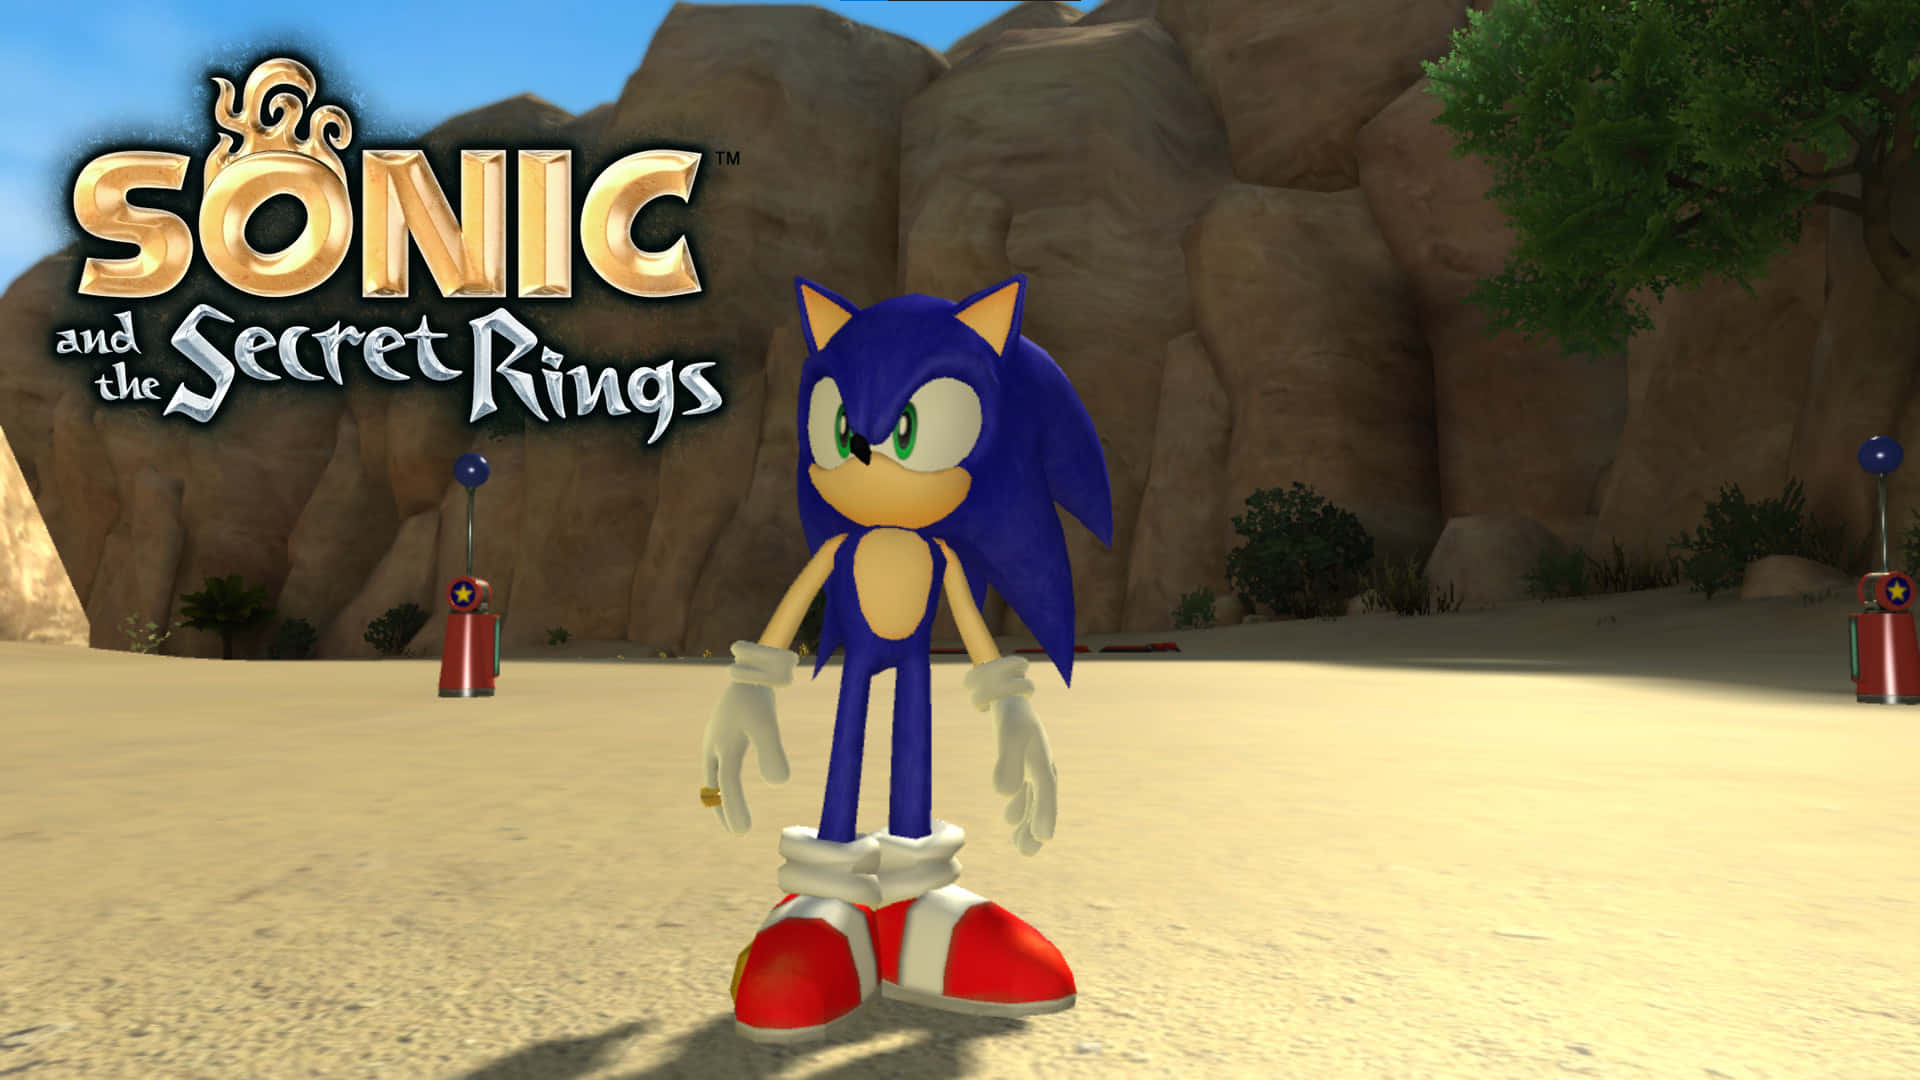 Sonic Secret Ringspng - Roblox T Shirt Roblox Mujer,Sonic Rings